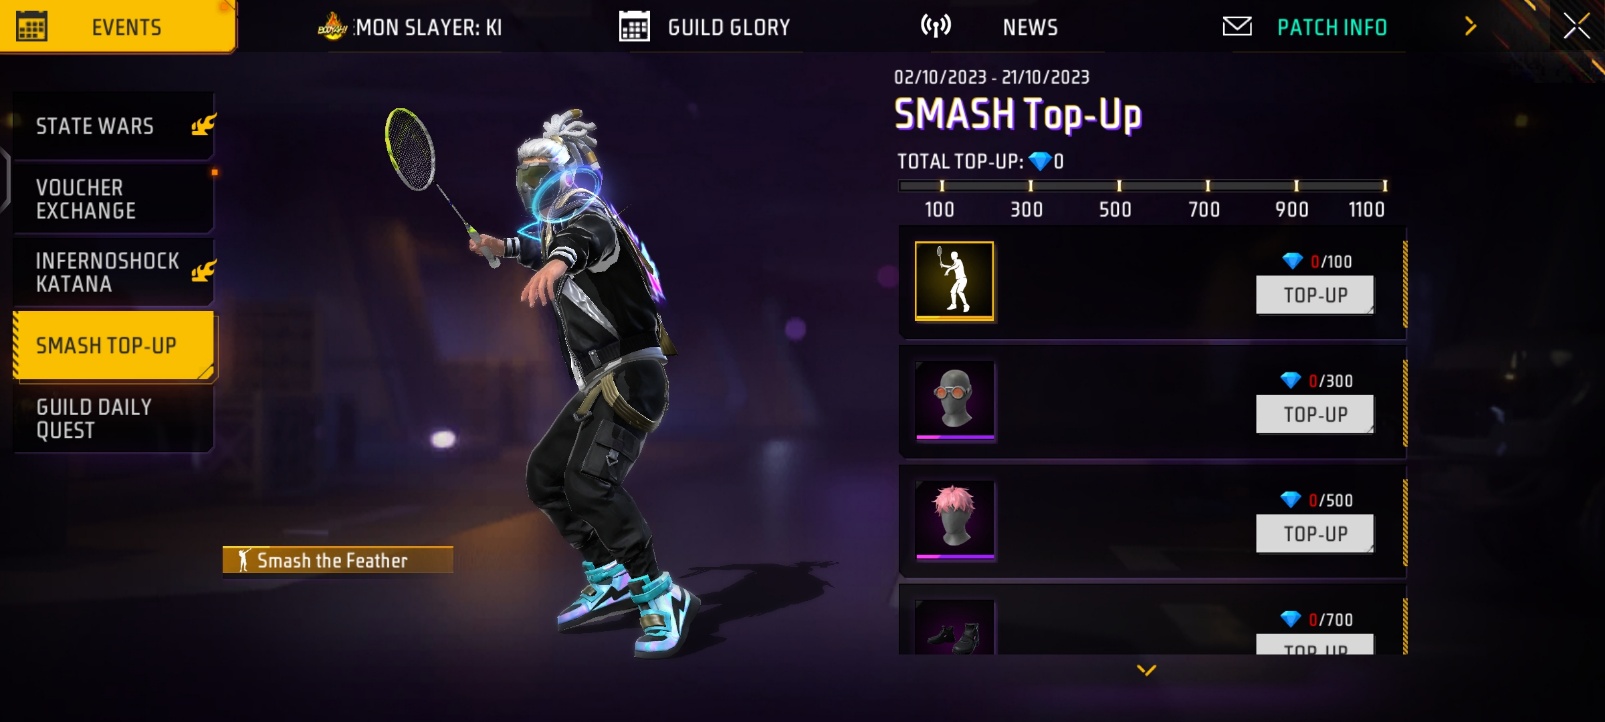 How To Get Smash The Feather Emote In Free Fire